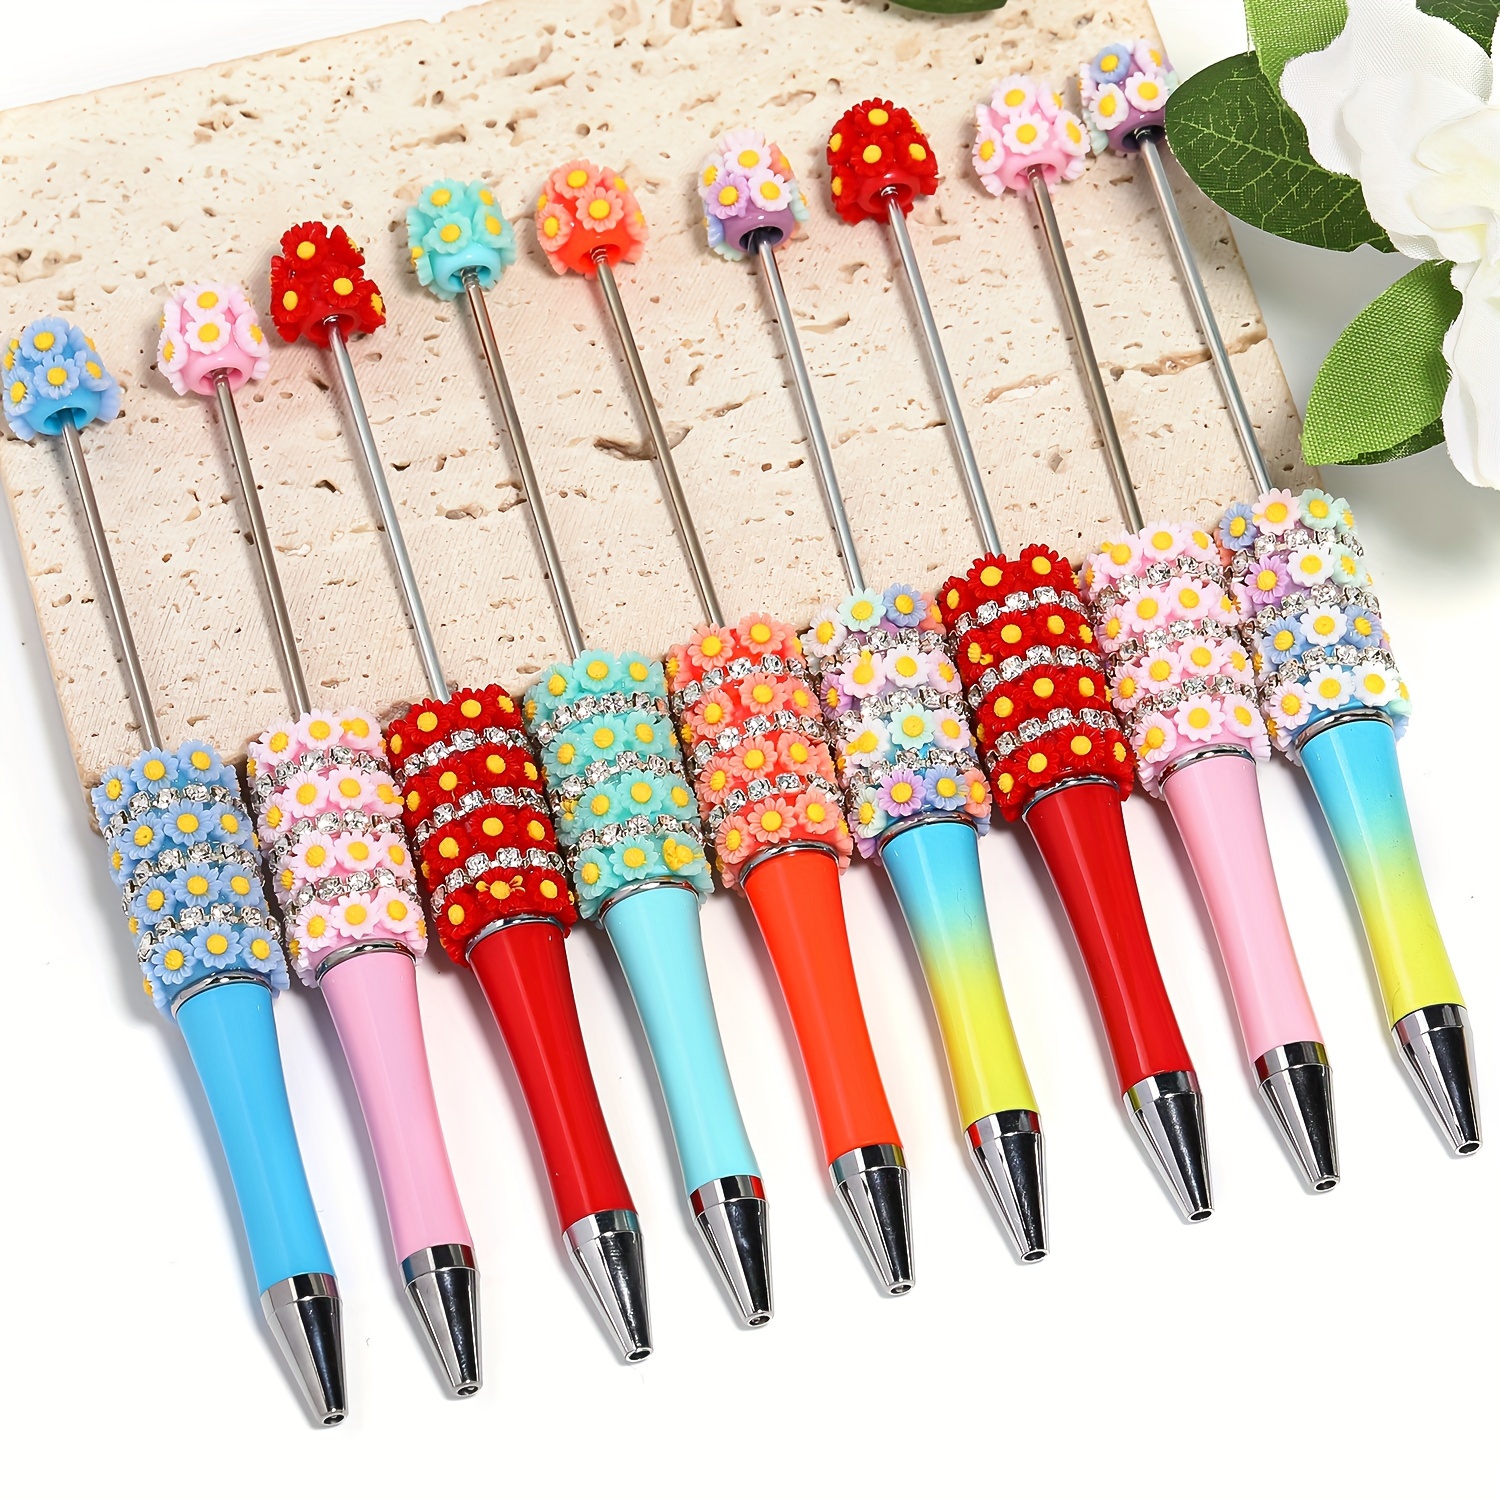 

8pcs Polyresin Beaded Flower Pens Diy Kit, Fashion Style Fantasy Floral Theme, Handcrafted Sunflower Bead Pen With Decorative Elements, No Power Required Crafting Set